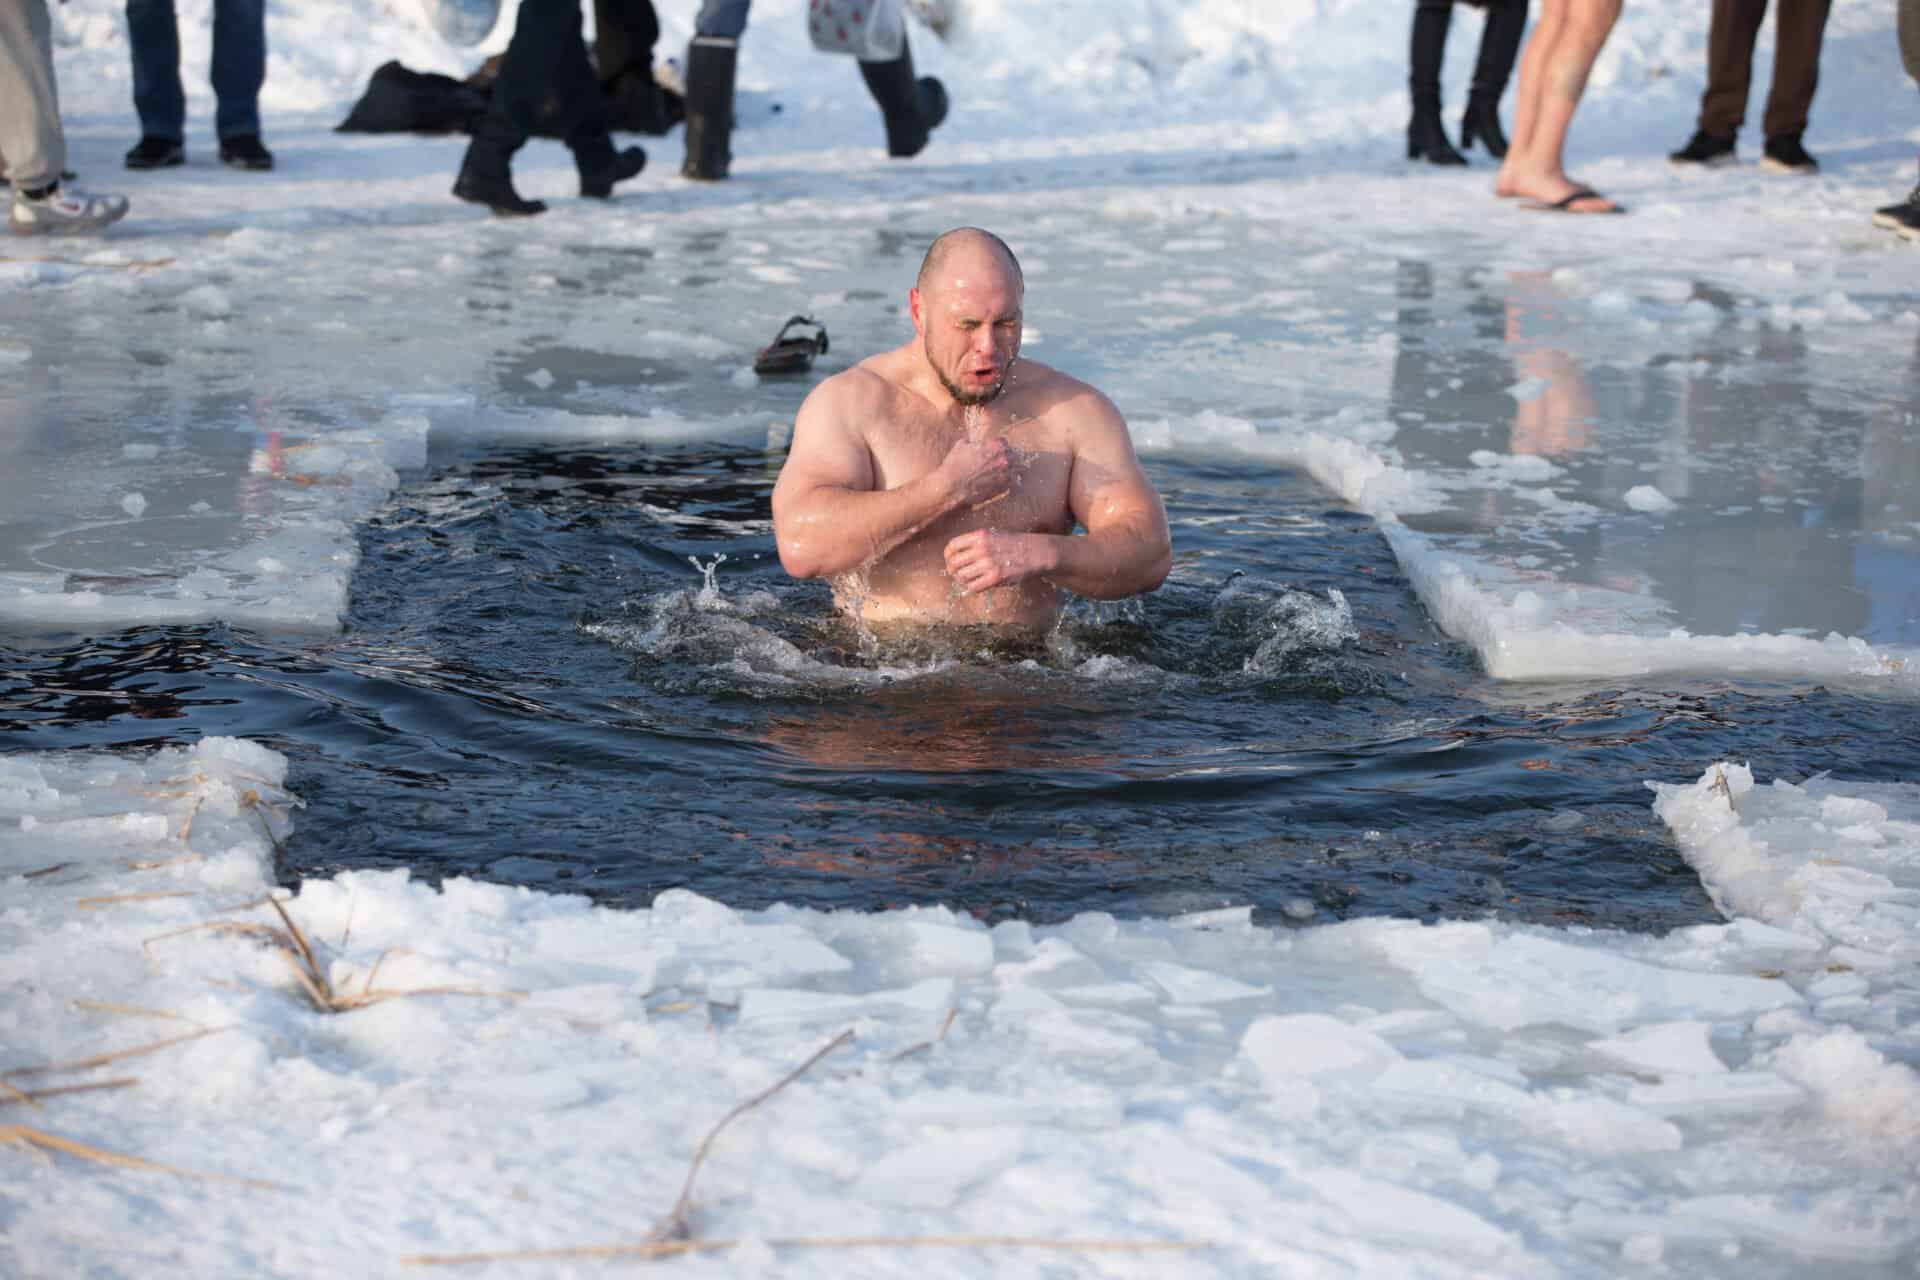 Bathing In The Ice Hole. Plunge Into The Ice Water